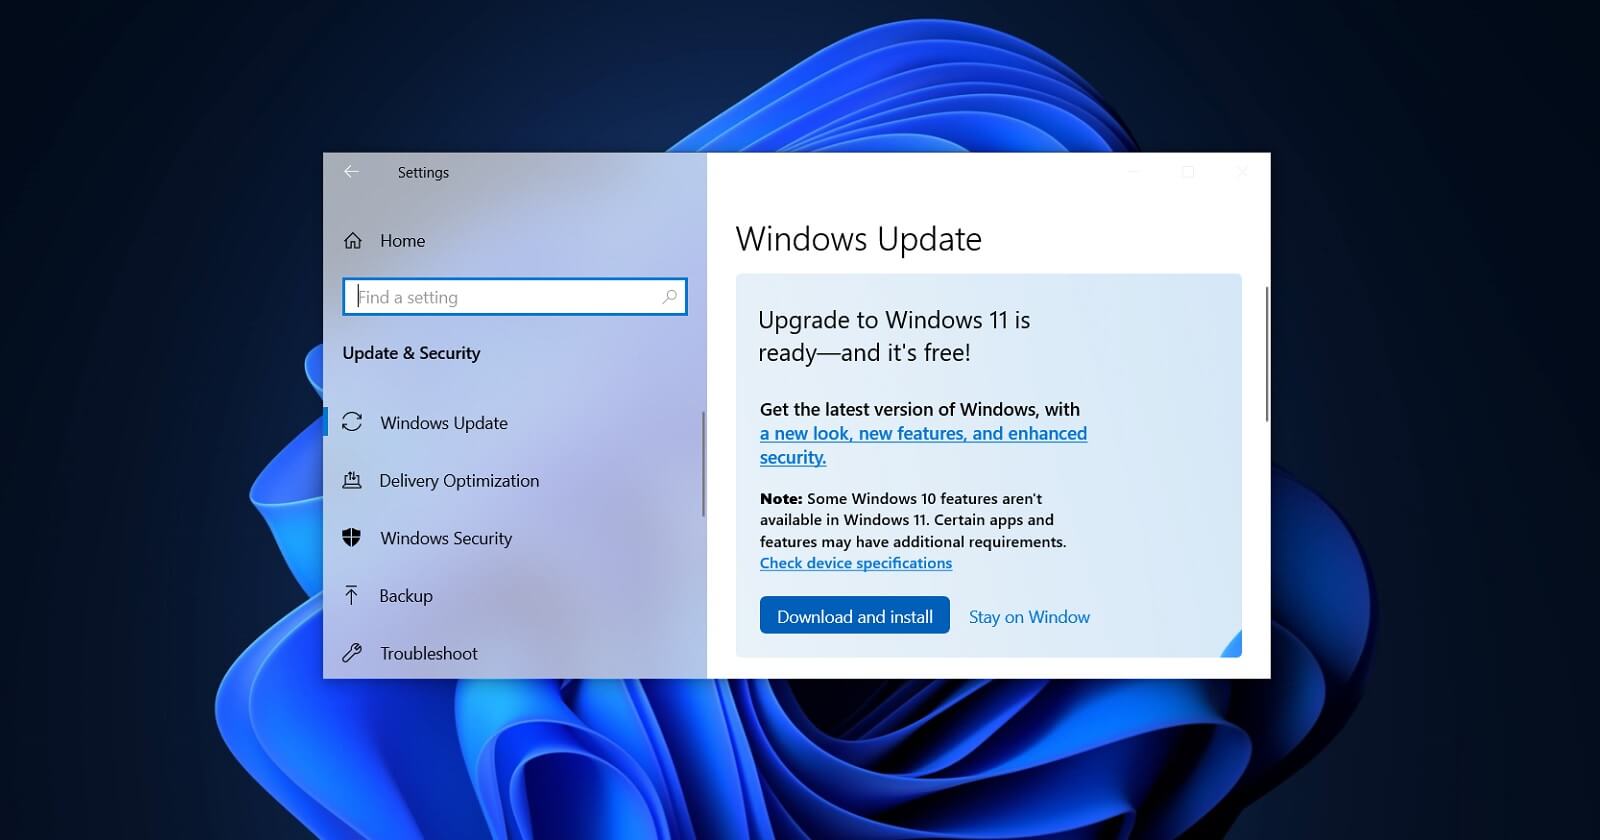 Windows 11 Latest Update Is Slowing Down PCs, Millions of Users Reports Frustration